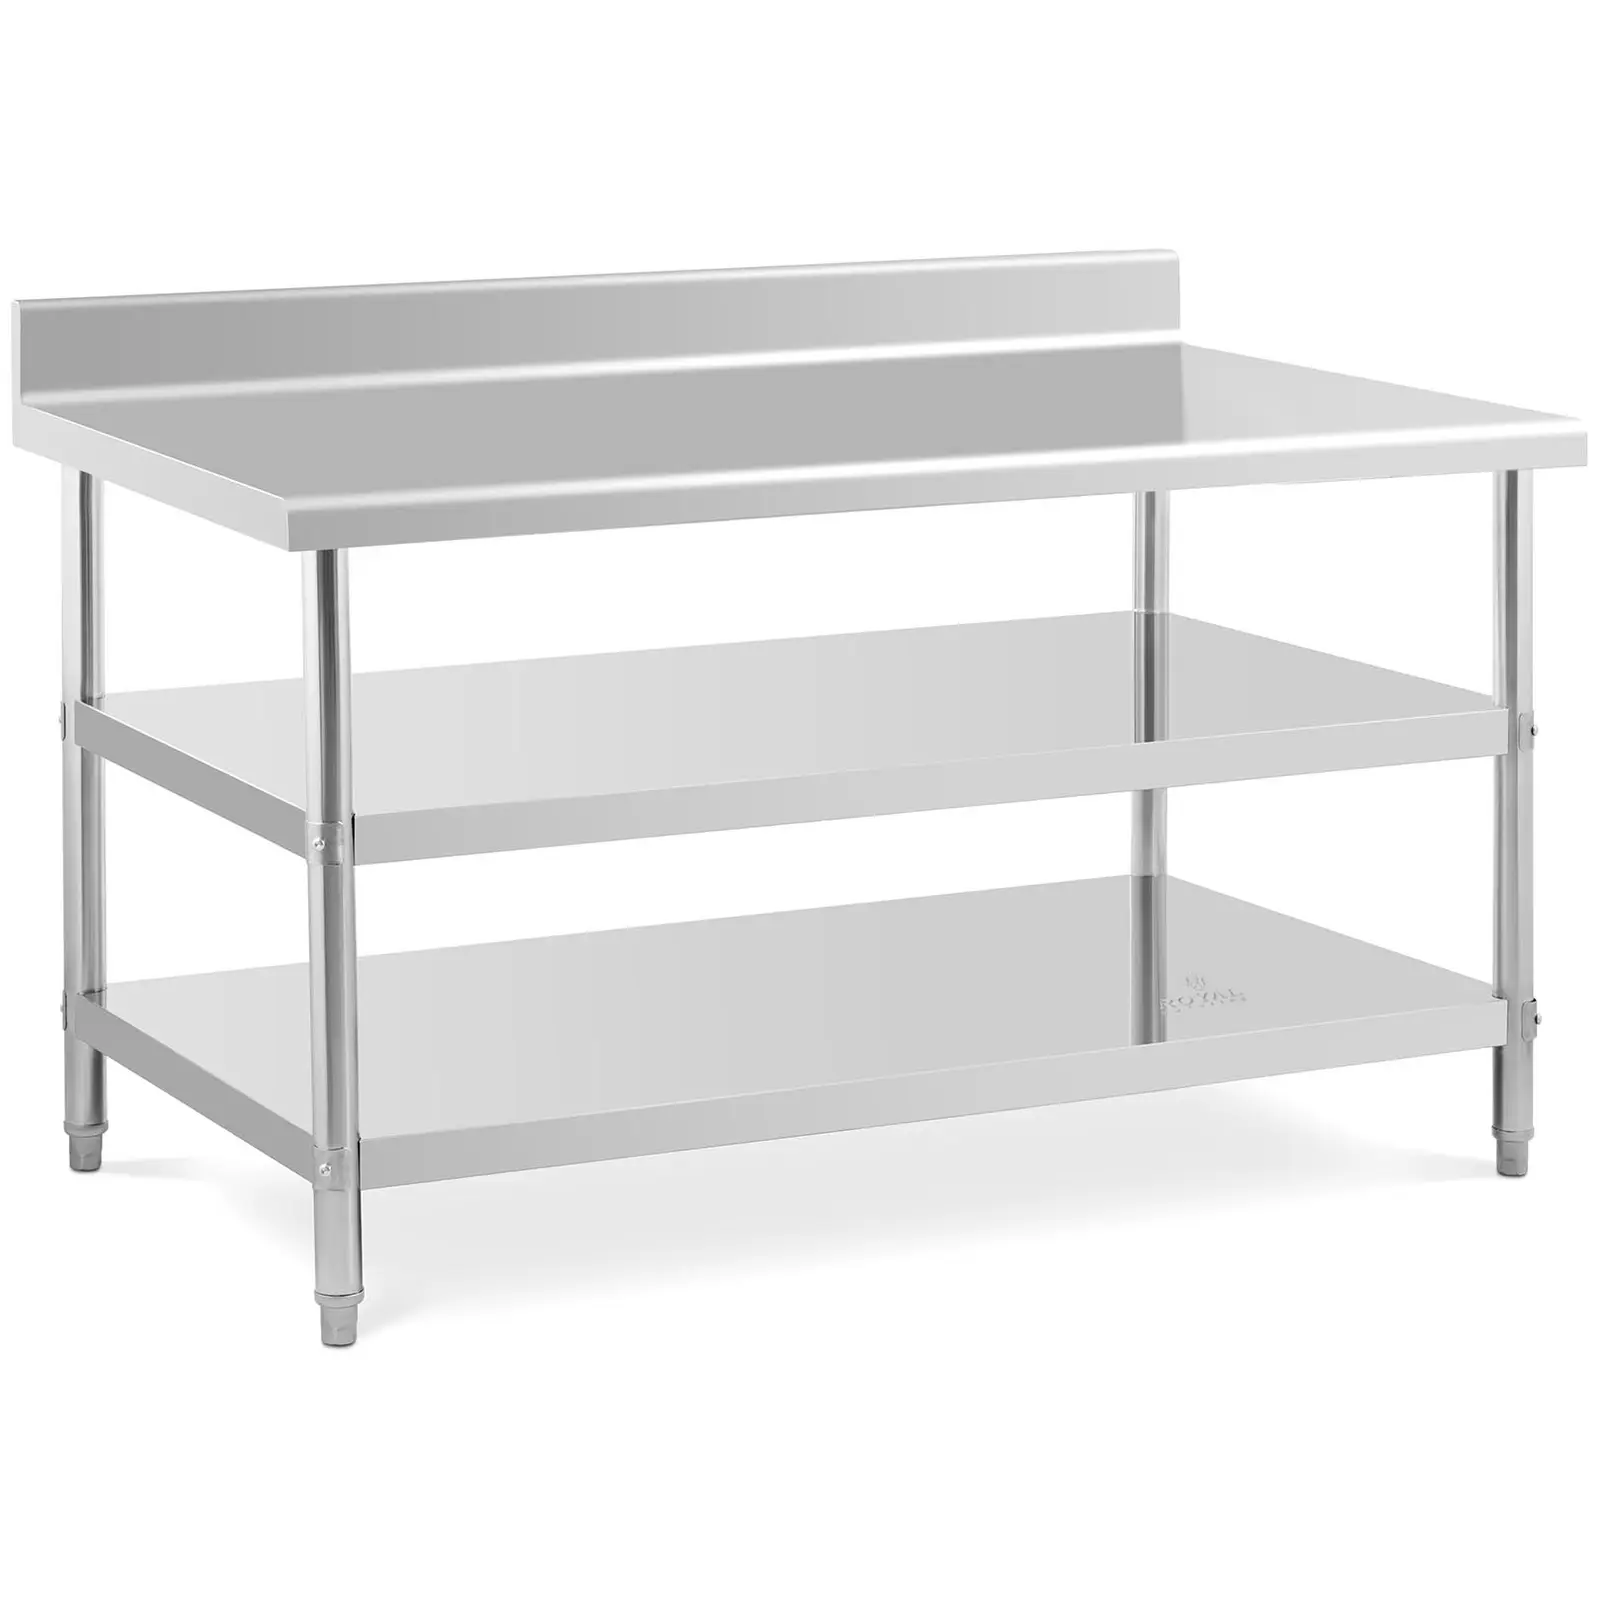 Stainless Steel Work Table with upstand - 150 x 90 x 16.5 cm - 229 kg - 2 shelves - Royal Catering